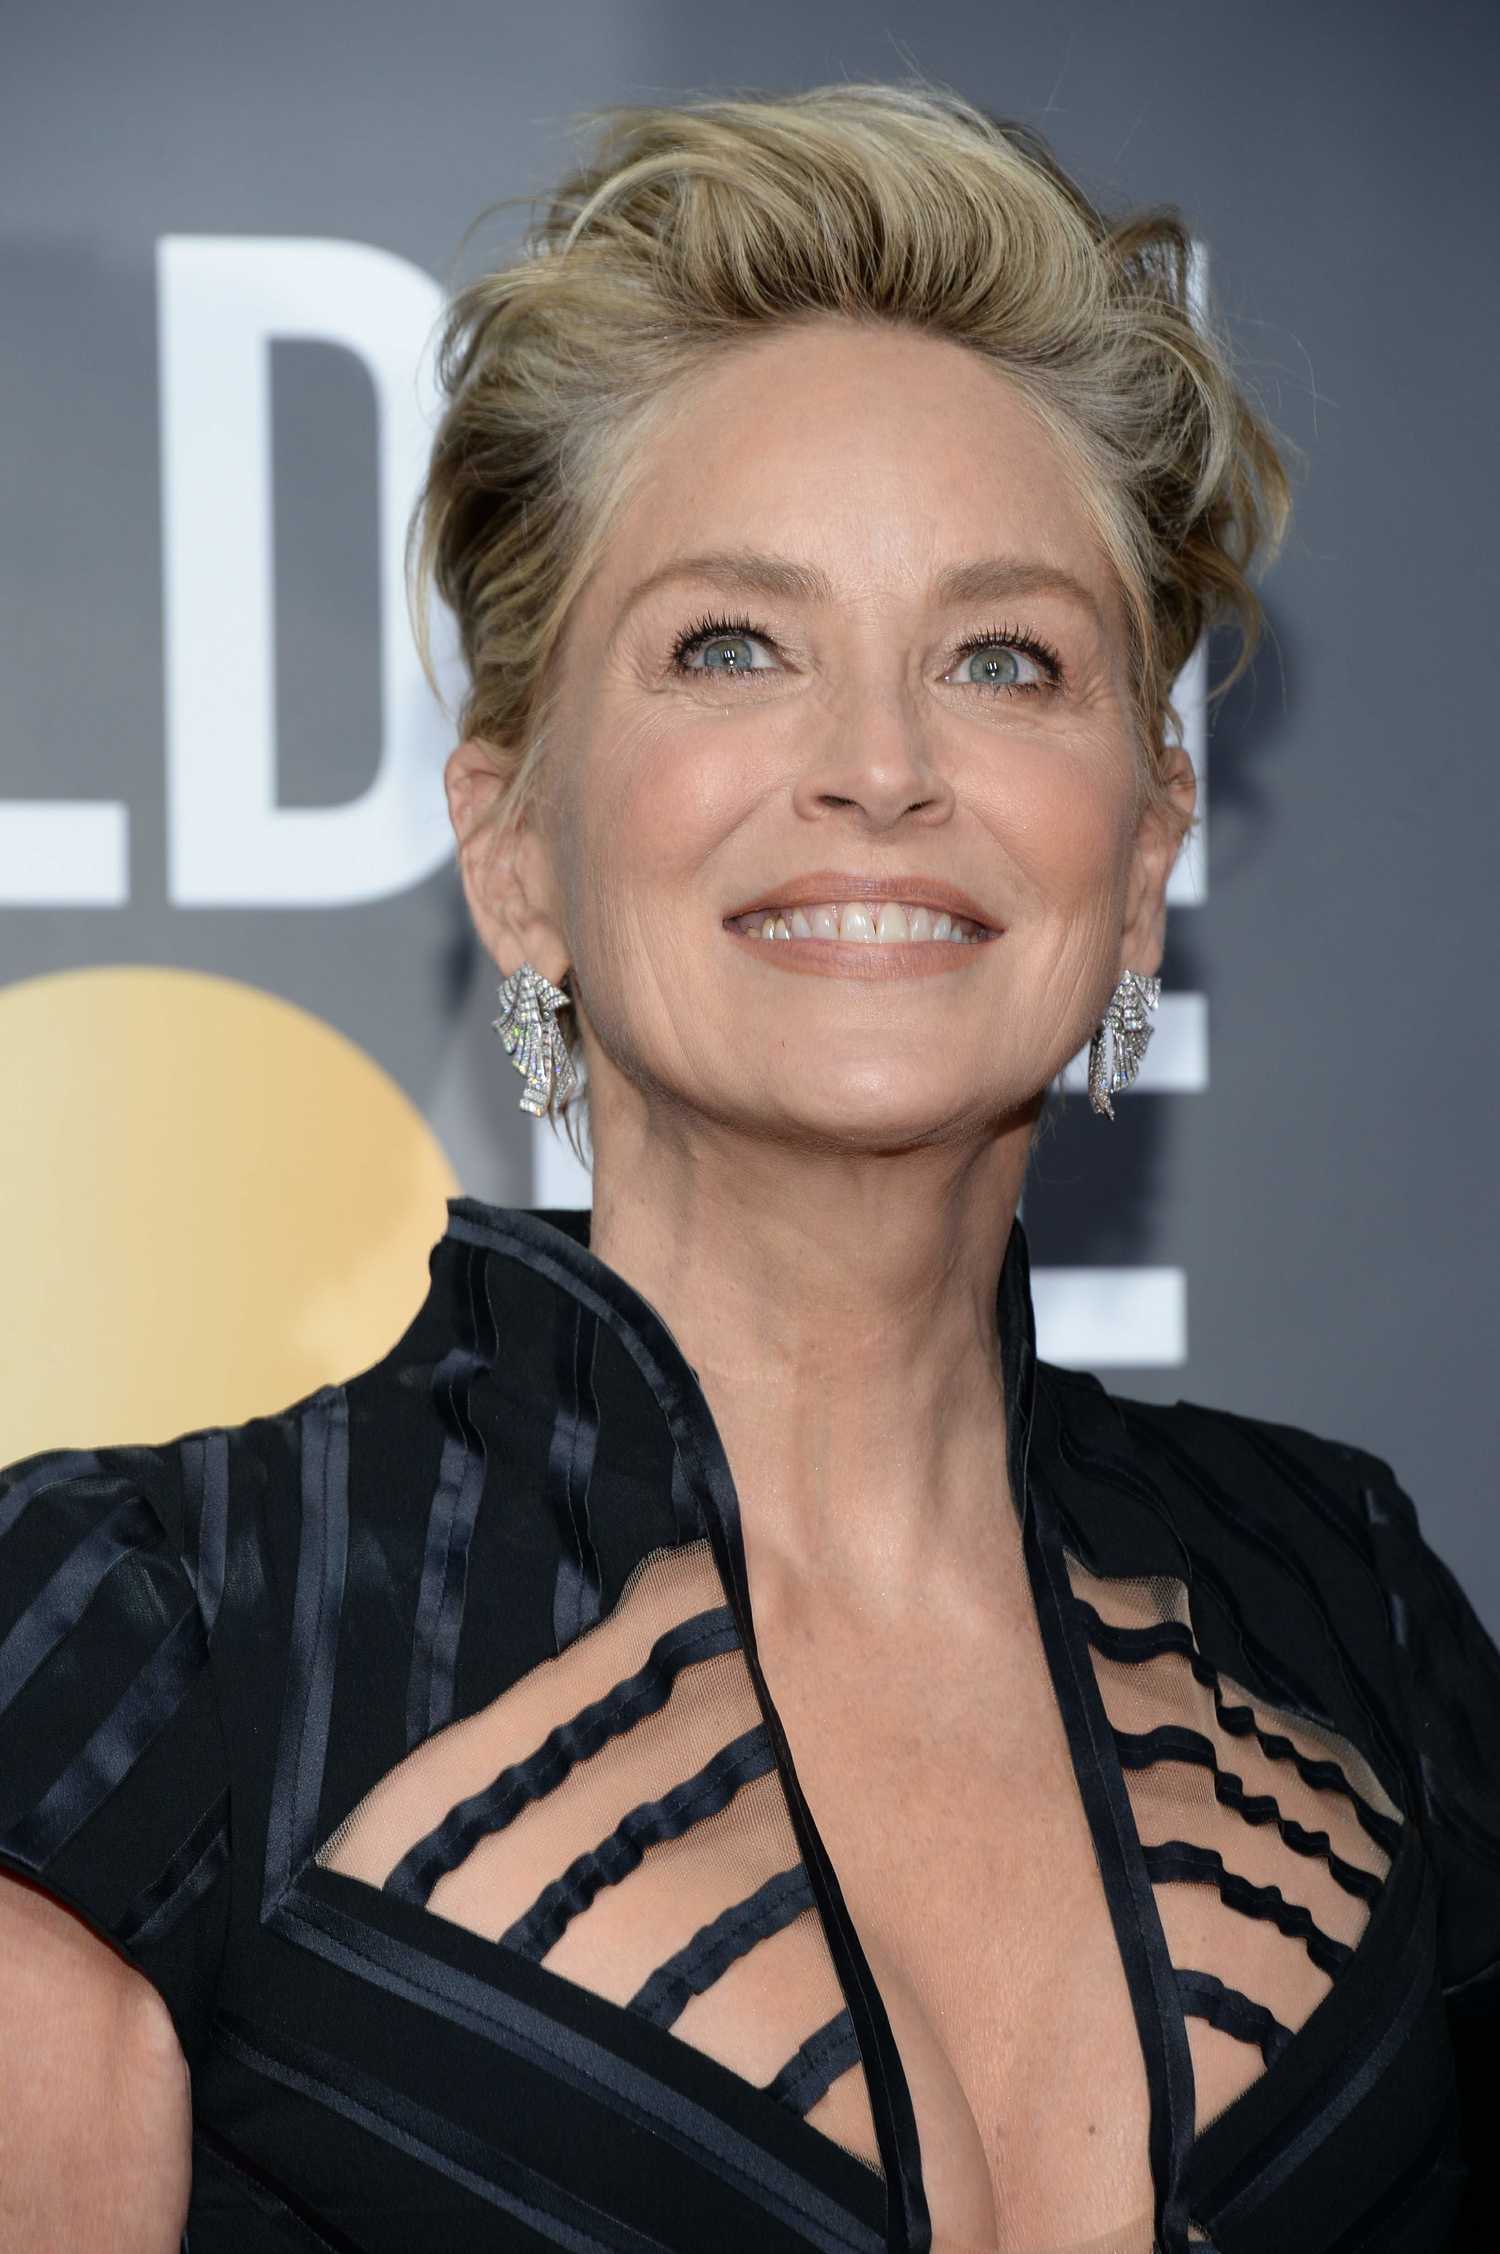 Sharon Stone at the 75th Annual Golden Globe Awards in Beverly Hills